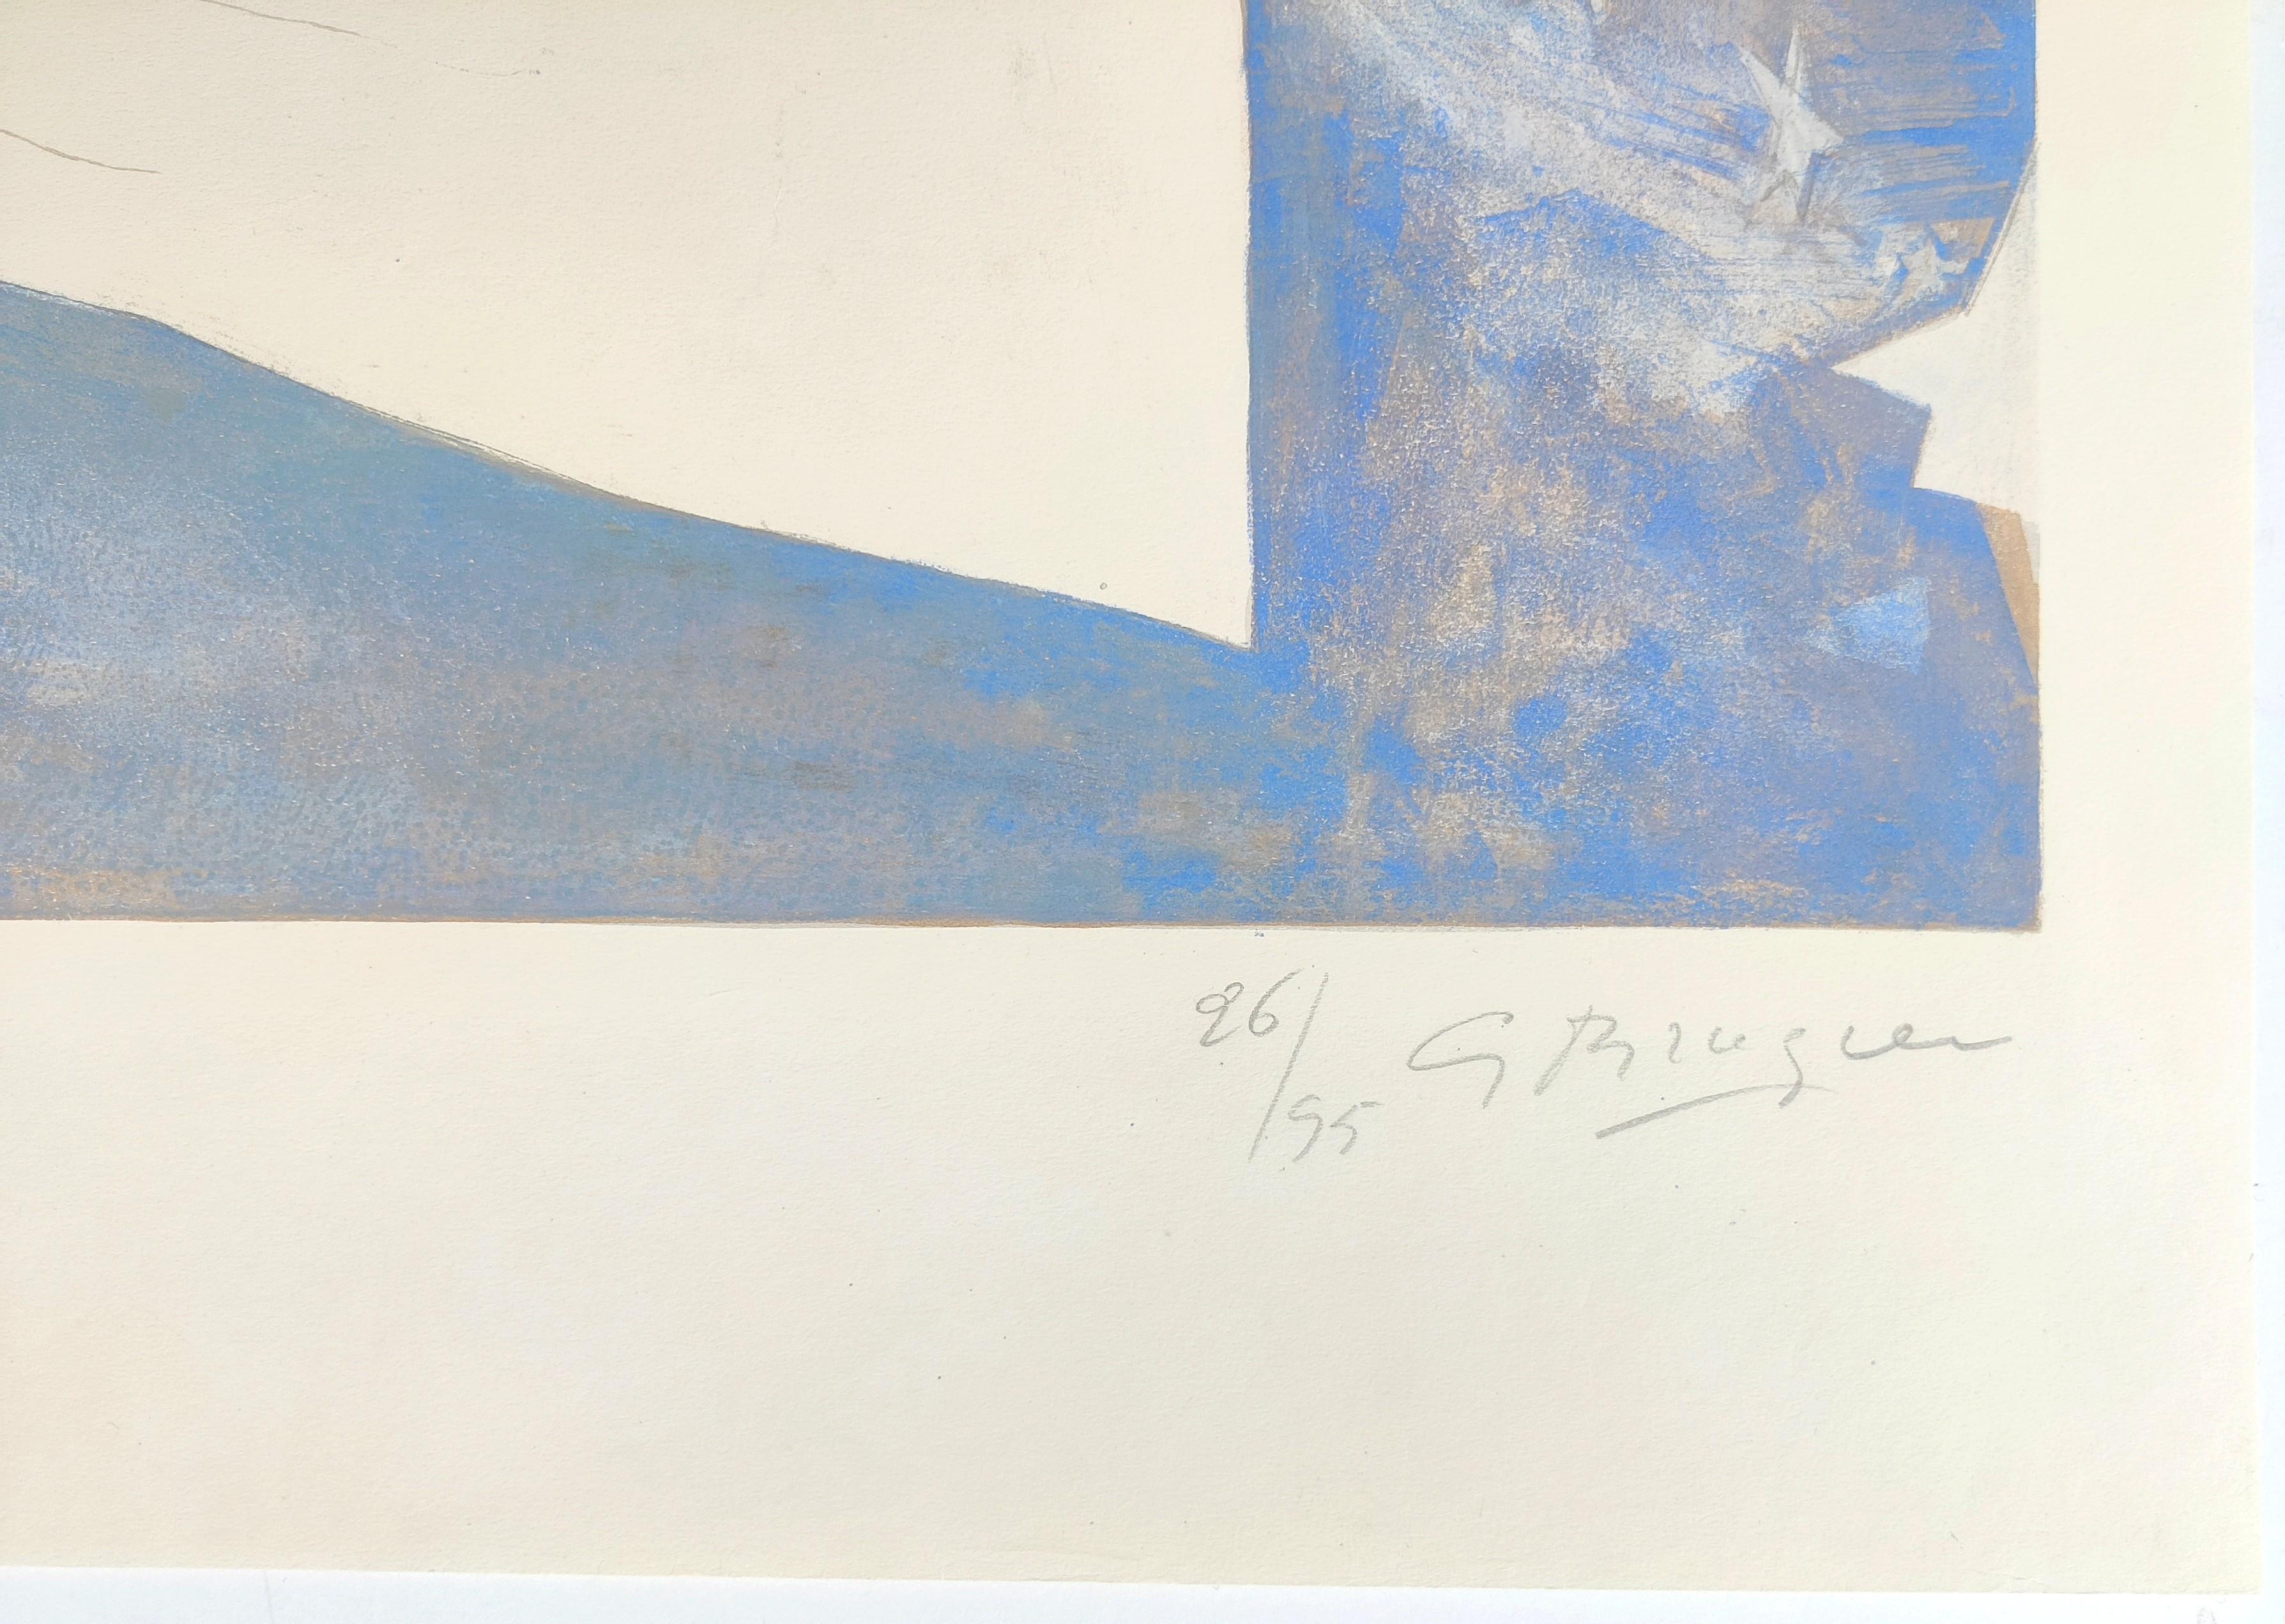 Large blue bird  - Abstract Print by Georges Braque